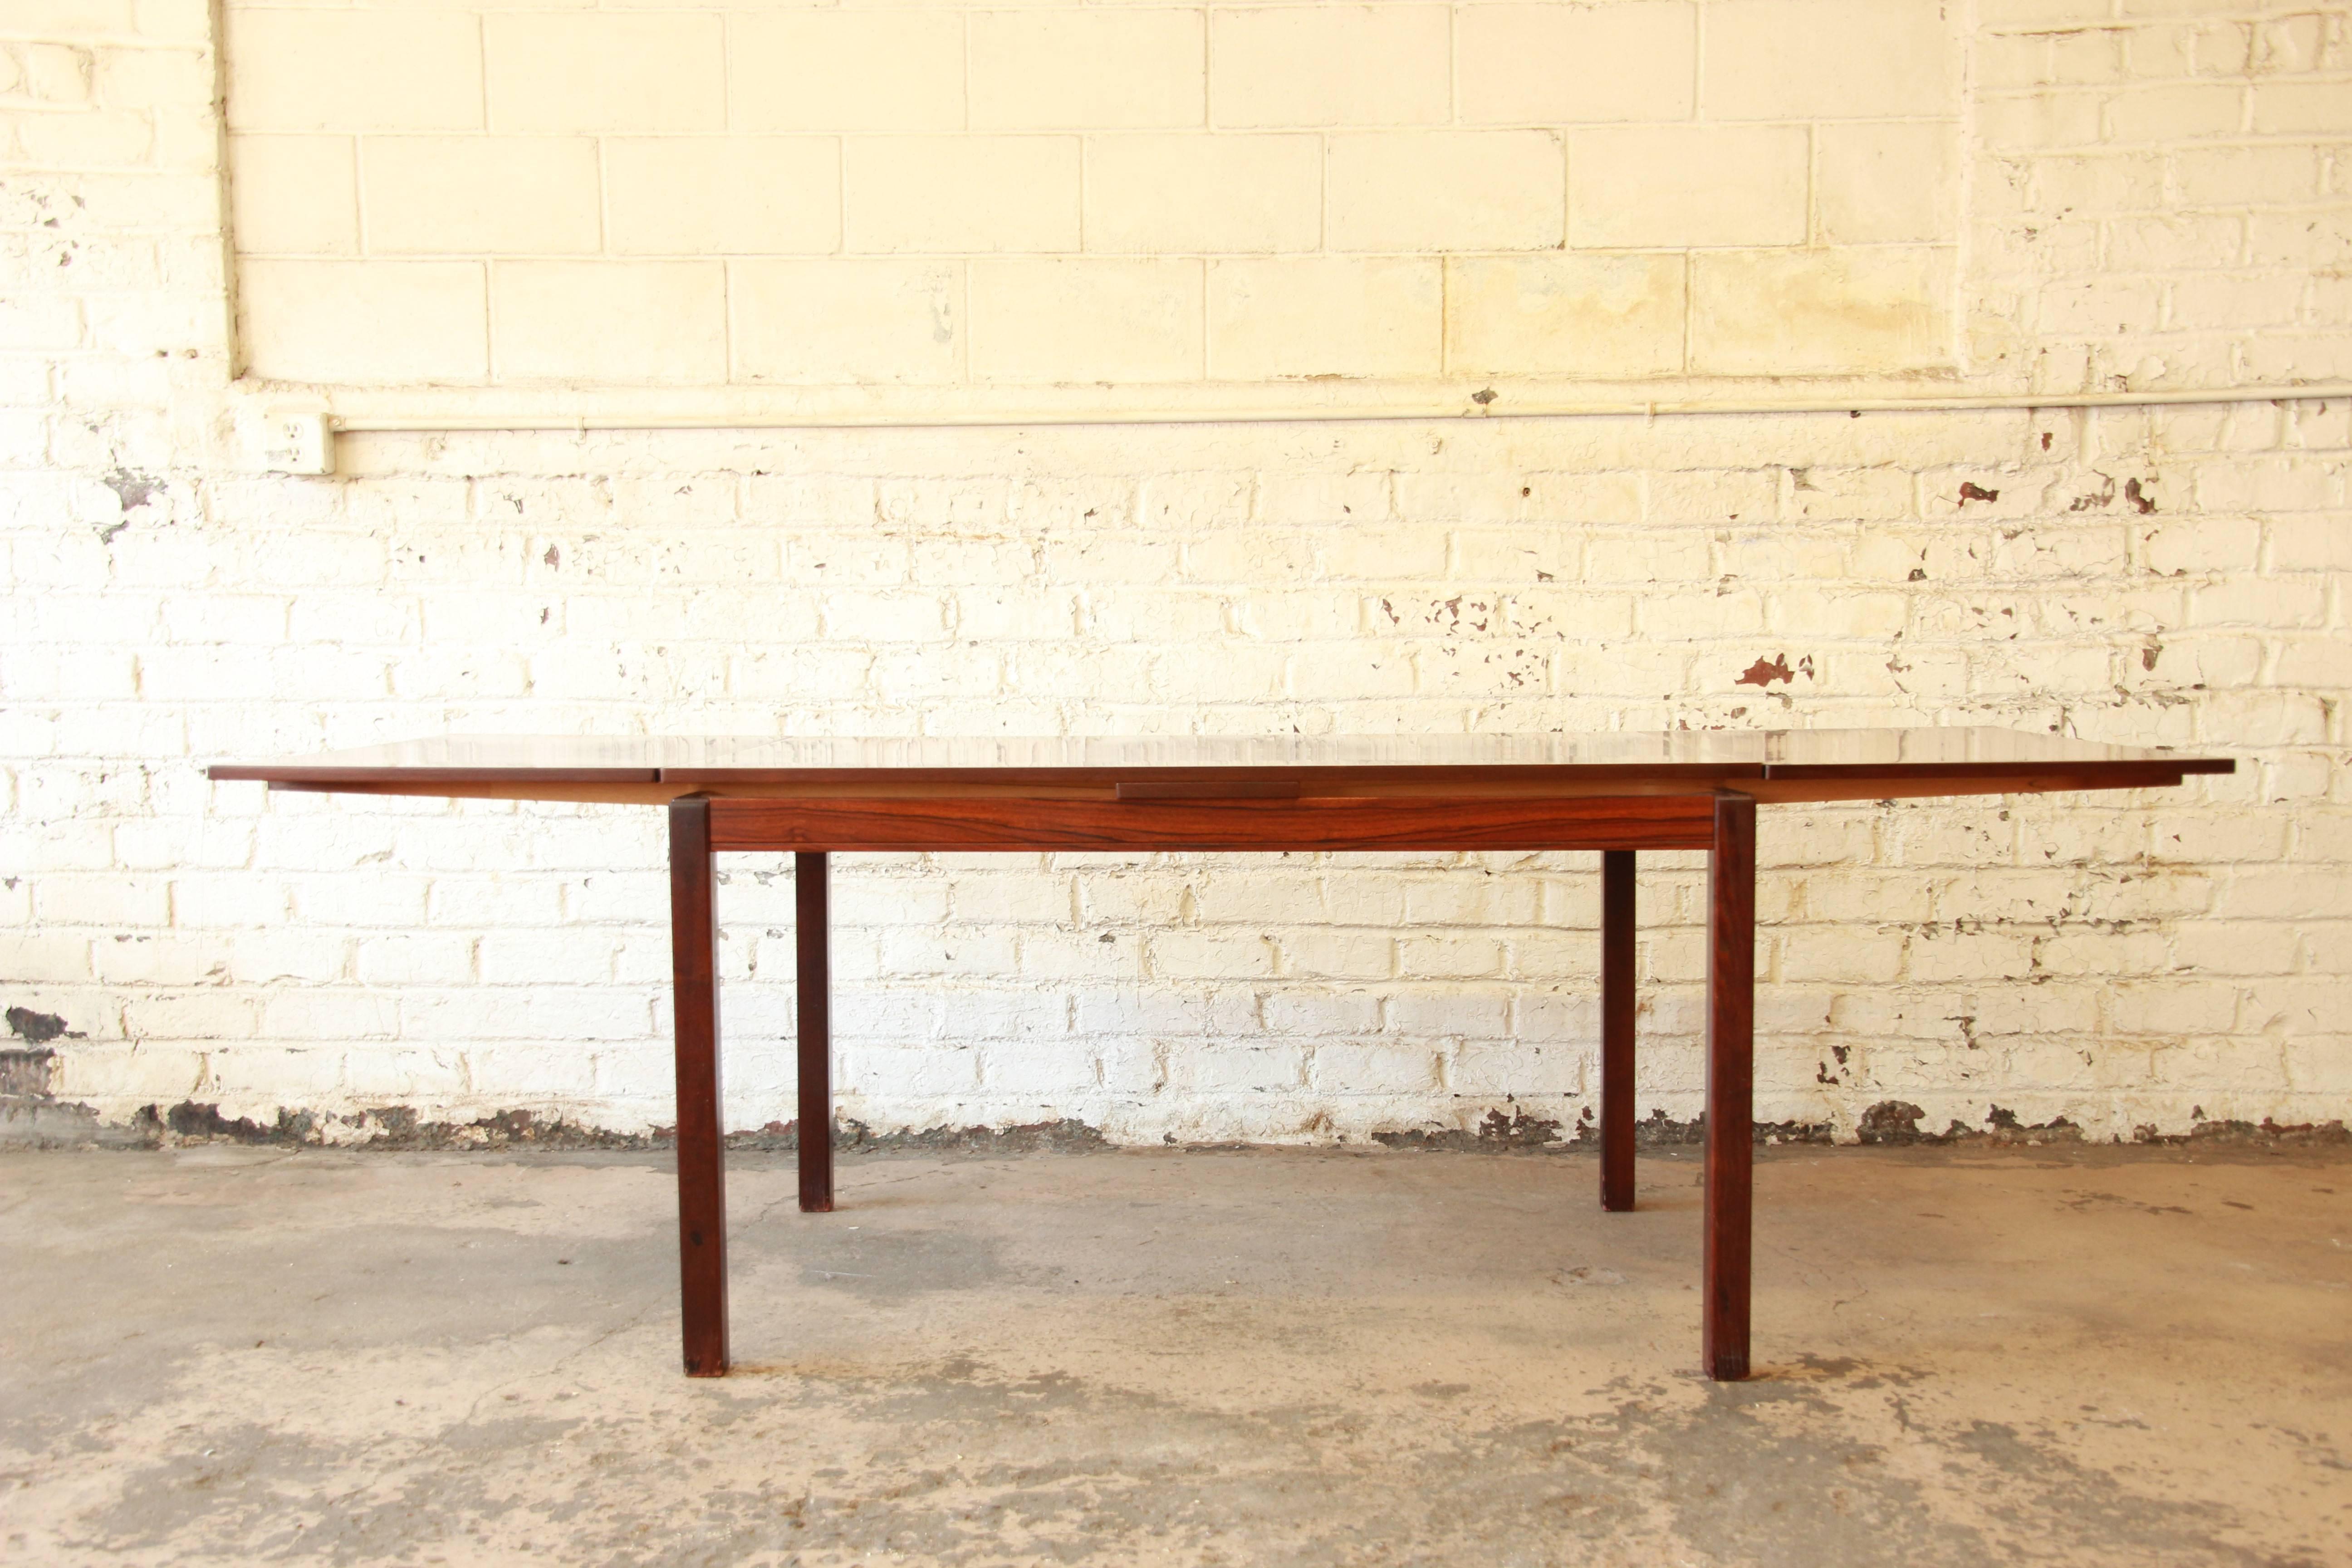 A stunning Norwegian rosewood extension dining table produced by Heggen, circa 1960s. The table features gorgeous wood grain and sleek Scandinavian Modern design. It is sturdy and well made. The table has built-in leaves that nearly double the